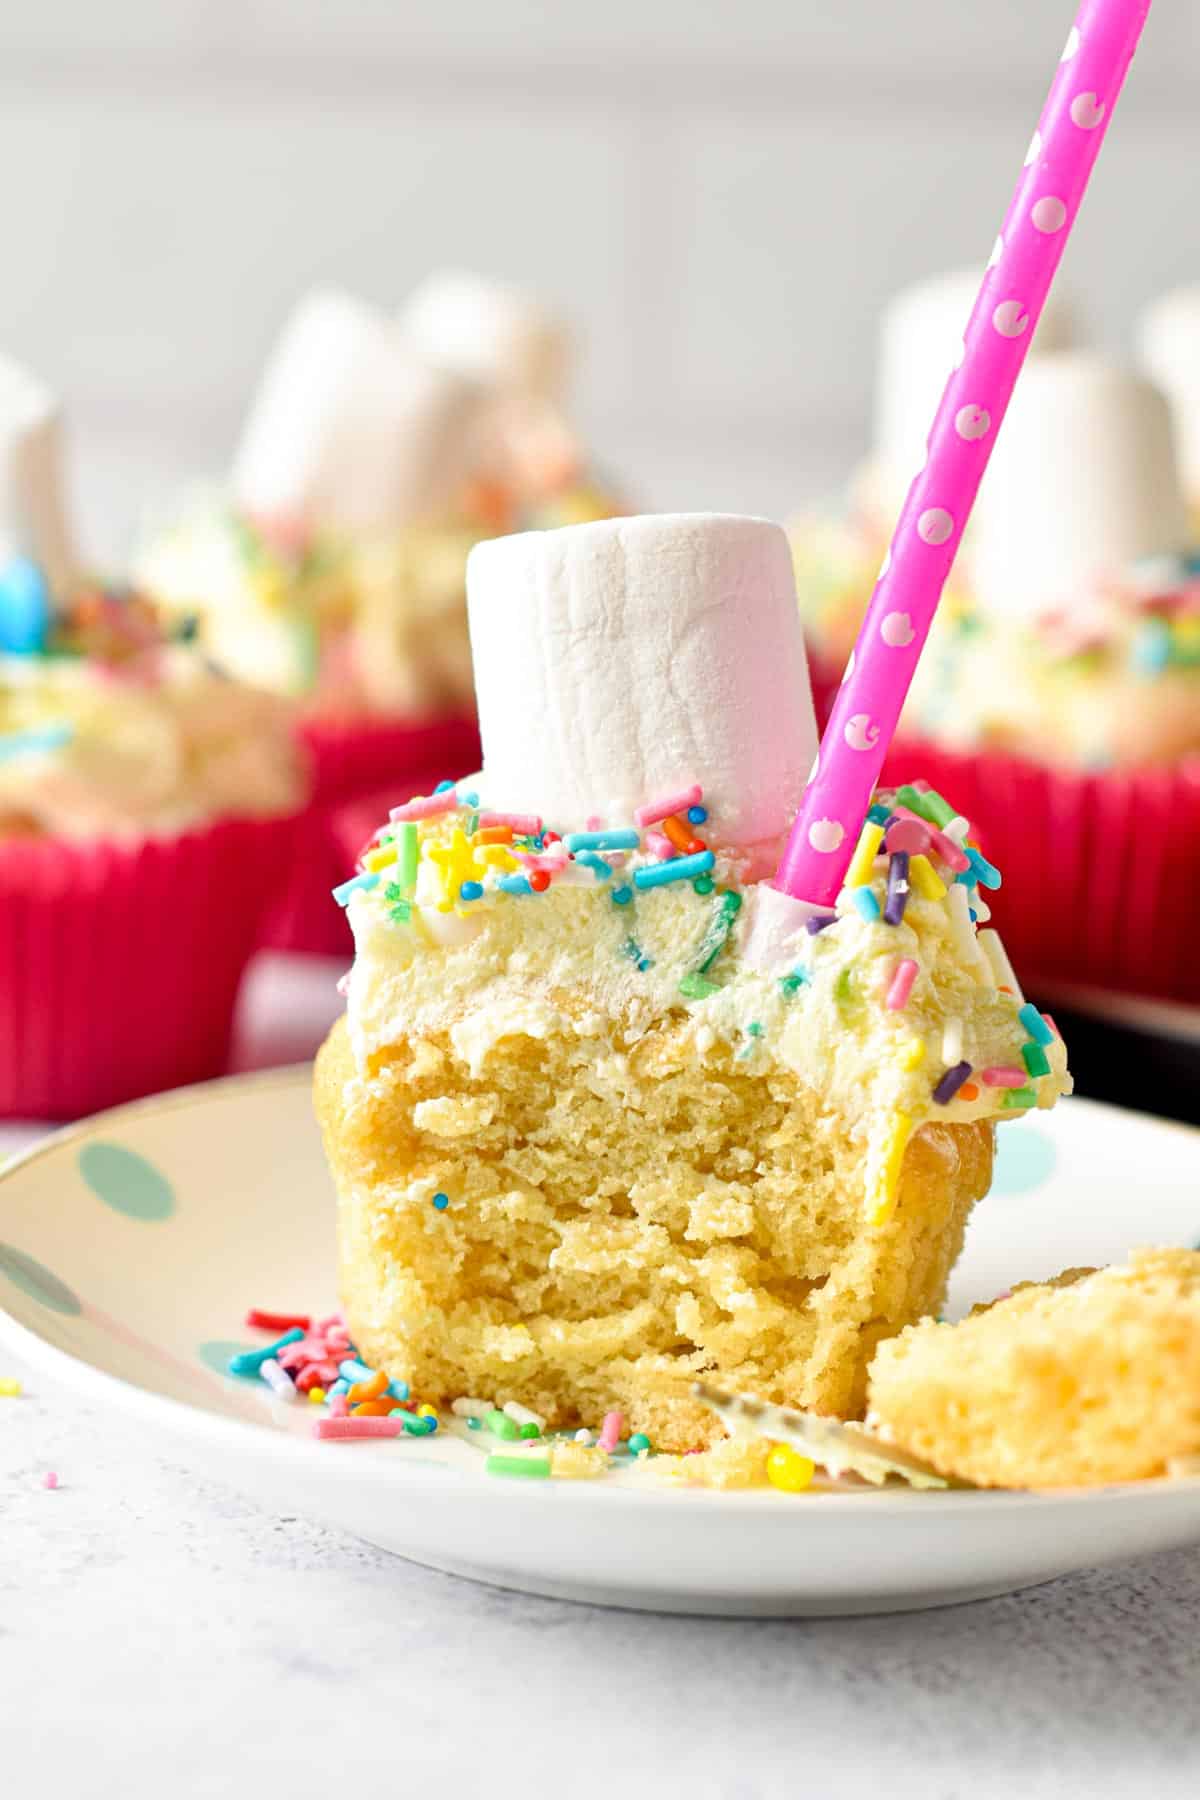 These Eggless Cupcakes are the most easy egg-free vanilla cupcakes ever with a moist crumb and creamy vanilla frosting. Plus, these cupcakes are also dairy-free and vegan approved.